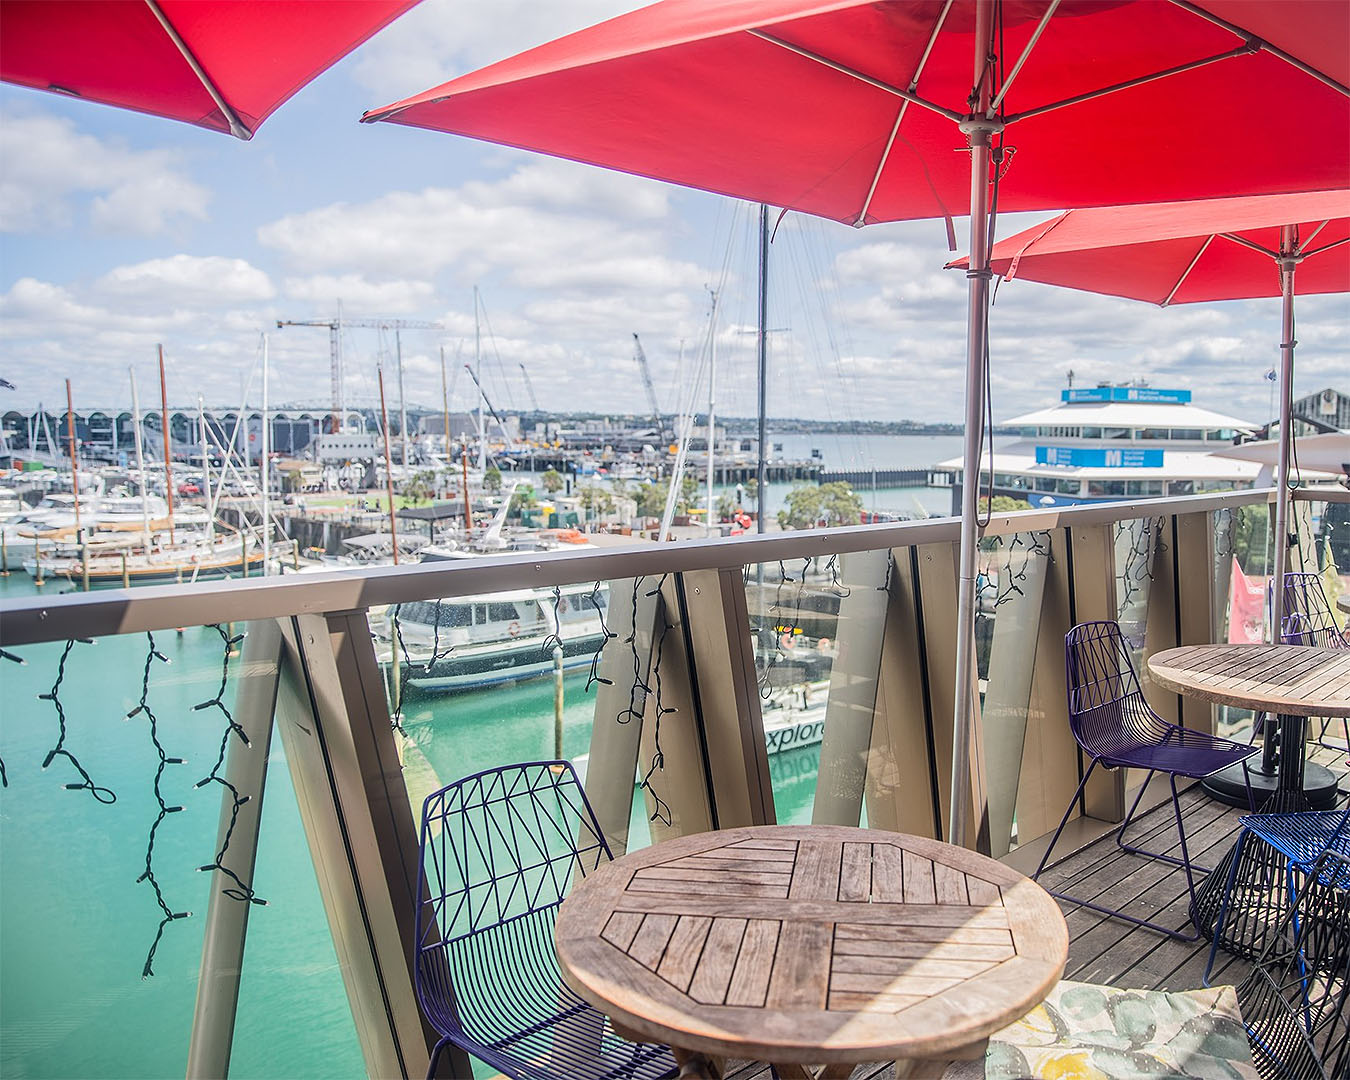 The stunning view from Parasol & Swing, one of the best bars in Auckland Viaduct. 